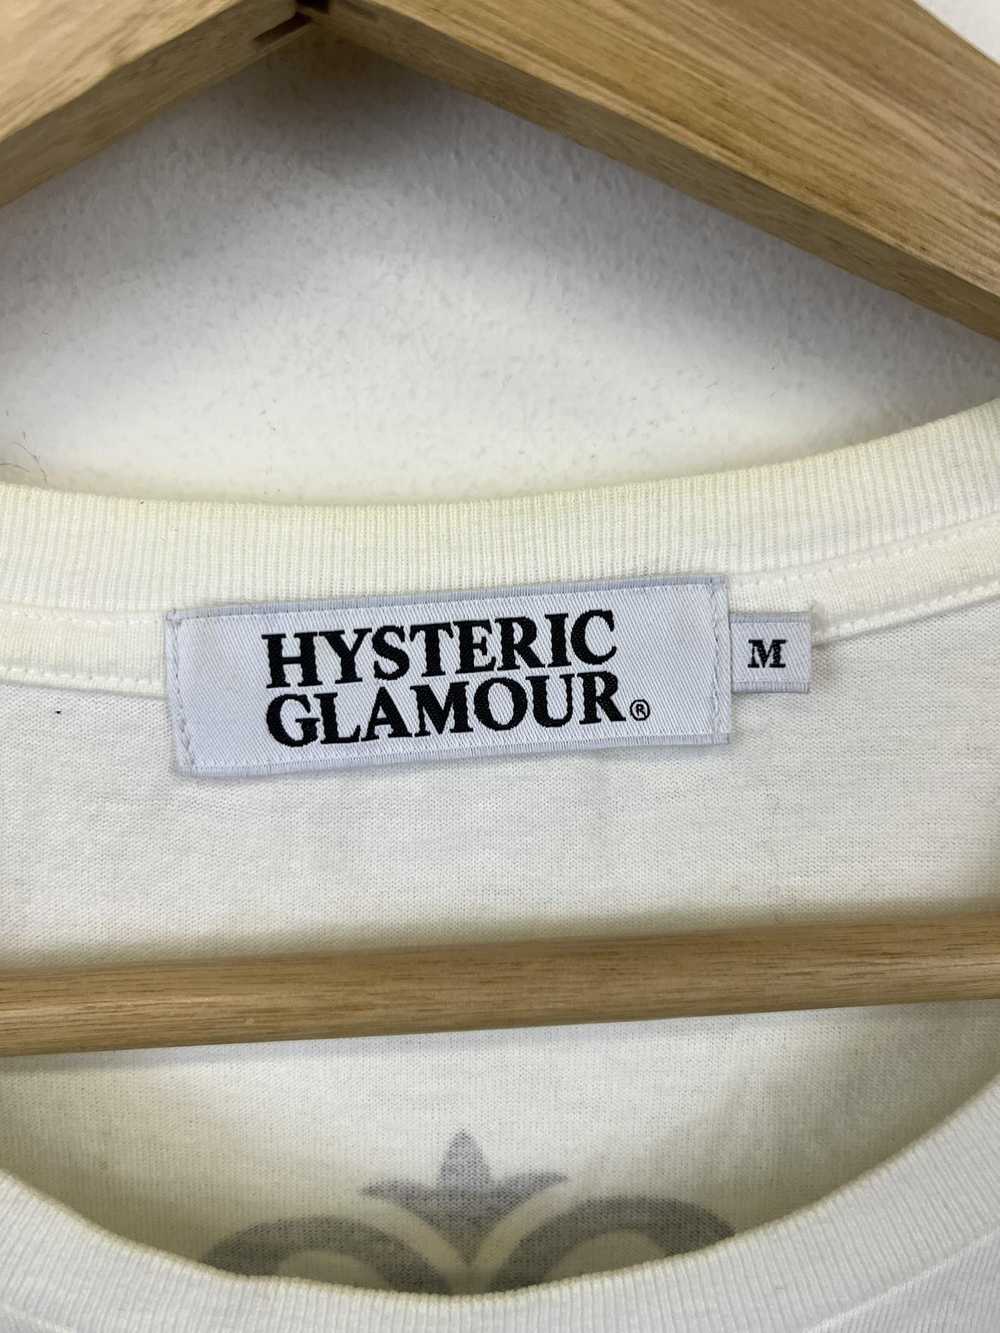 Hysteric Glamour × Japanese Brand × Streetwear Hy… - image 2